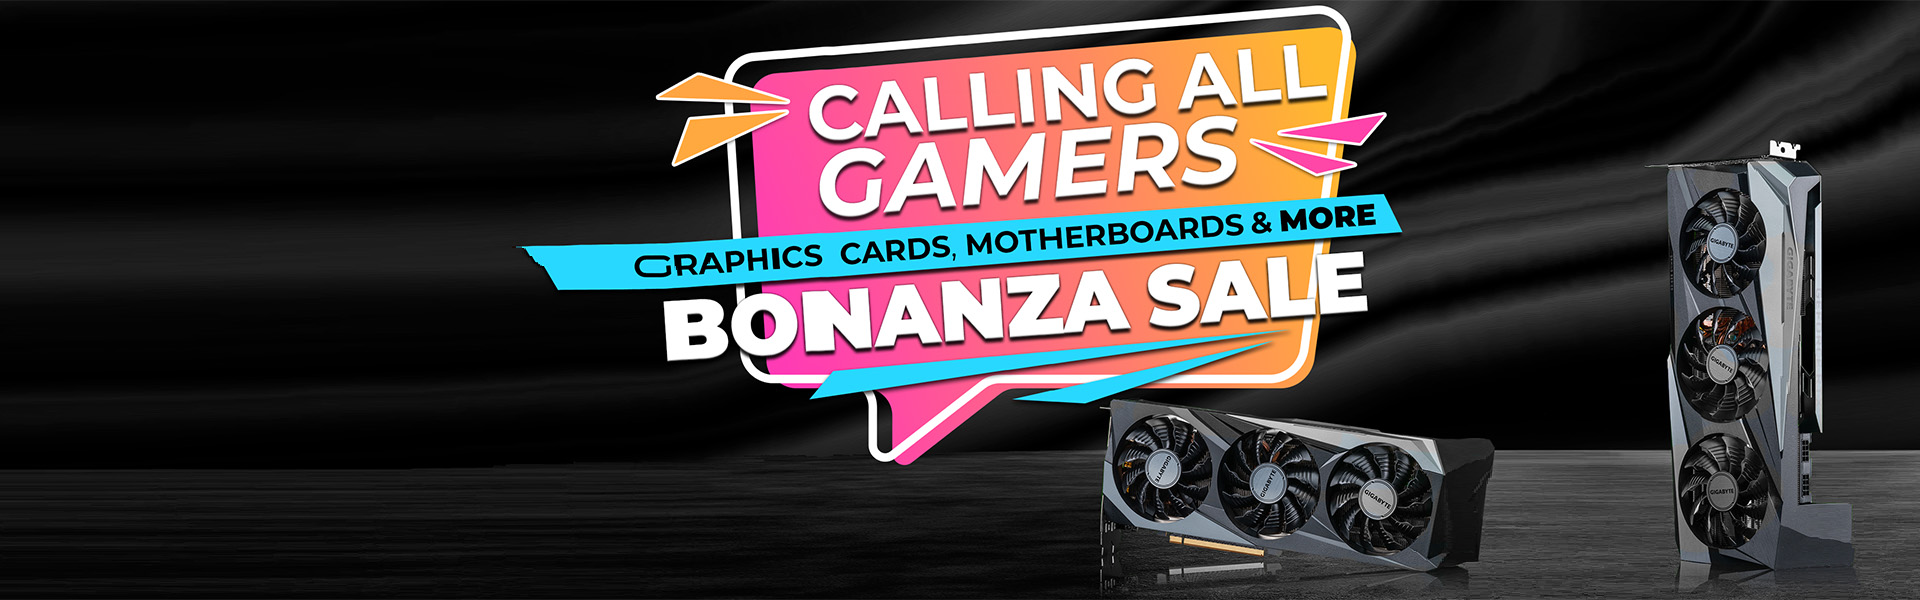 Newegg Launches Bonanza Sale Featuring Special Low Pricing on GPUs, Motherboards and Monitors